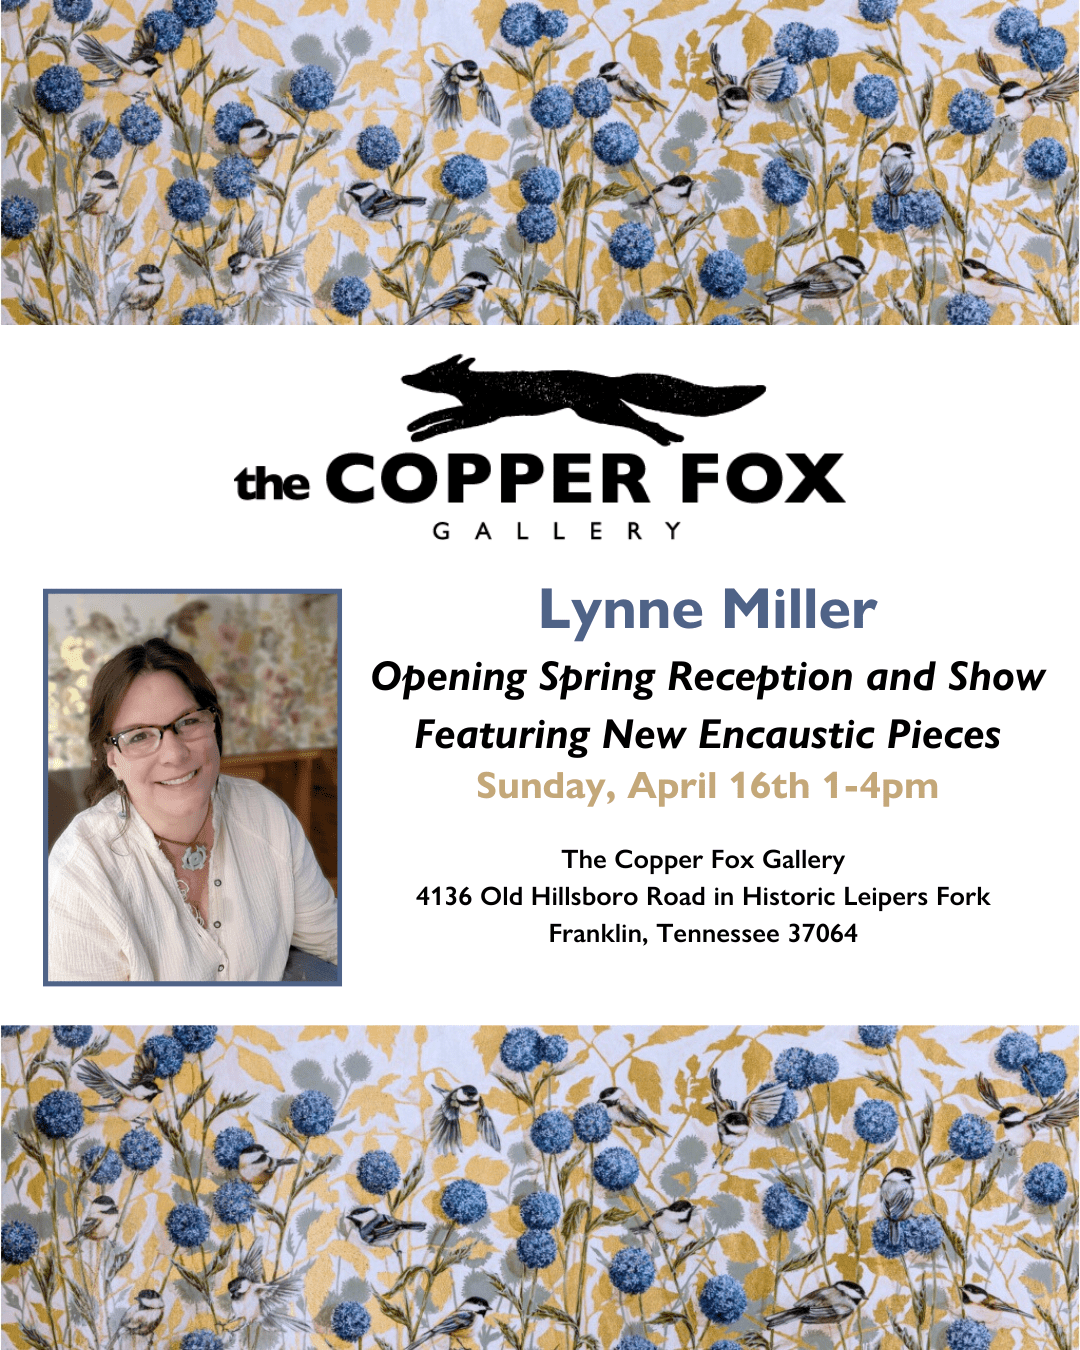 Opening Exhibition and Reception for Artist Lynne Miller Leiper's Fork TN